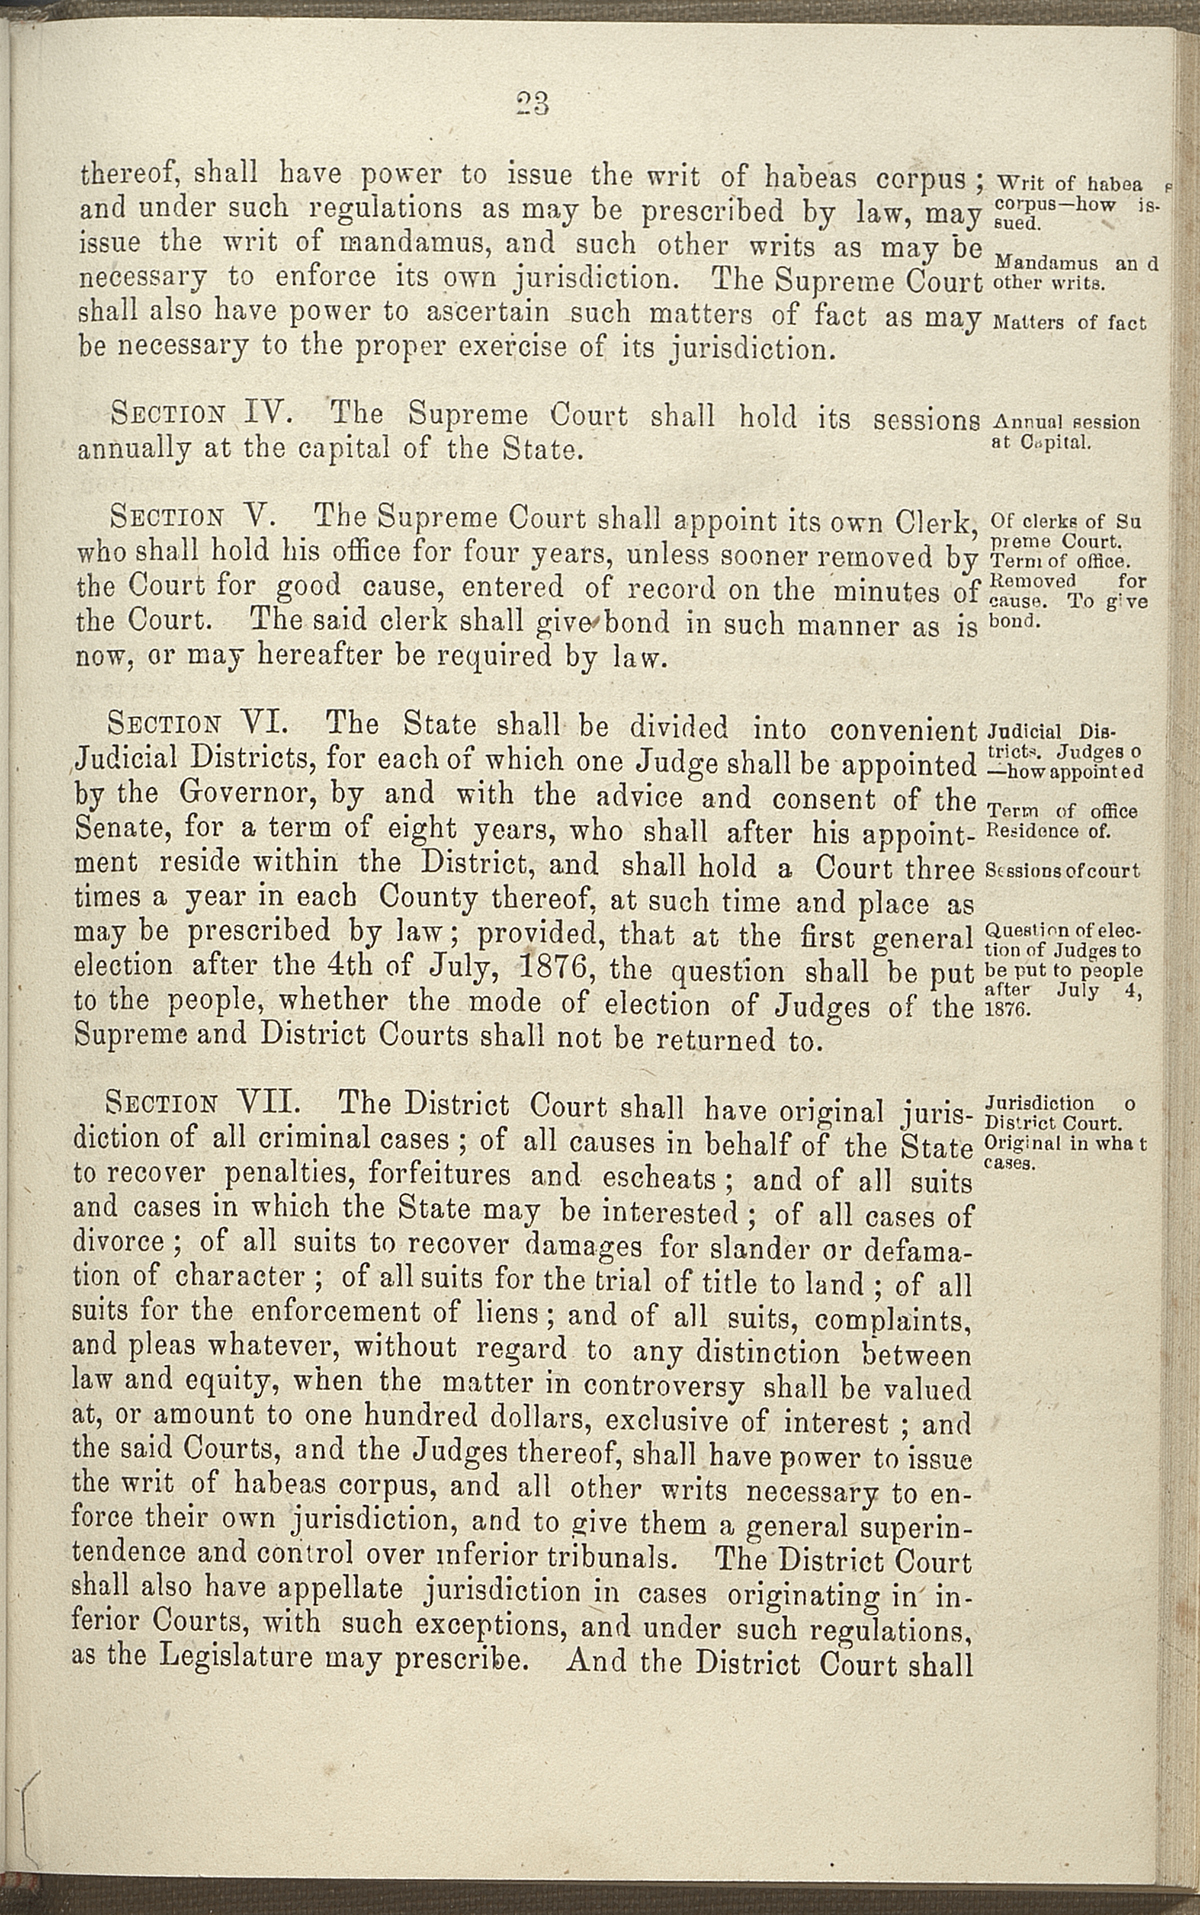 Article V, Sections III-VII